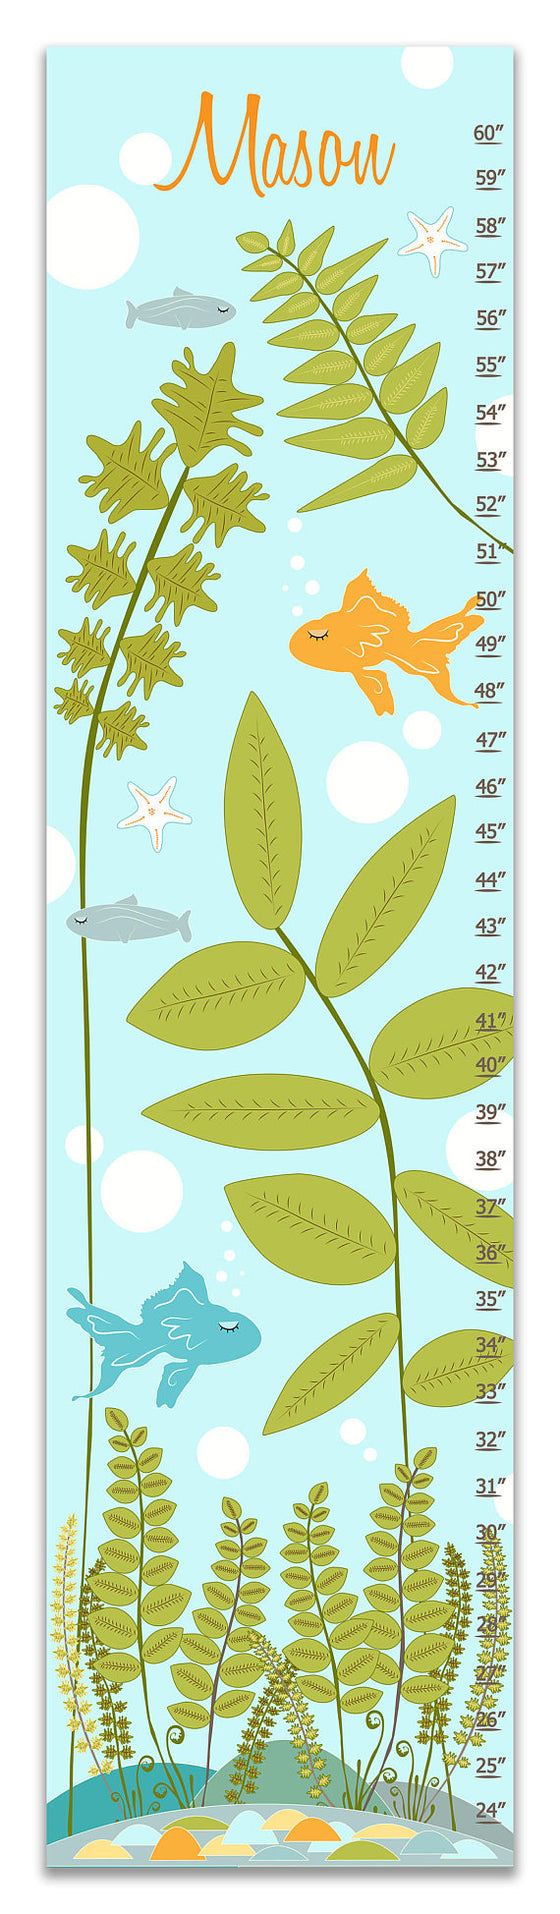 Under the Sea Personalized Growth Chart - Children's Room Decor